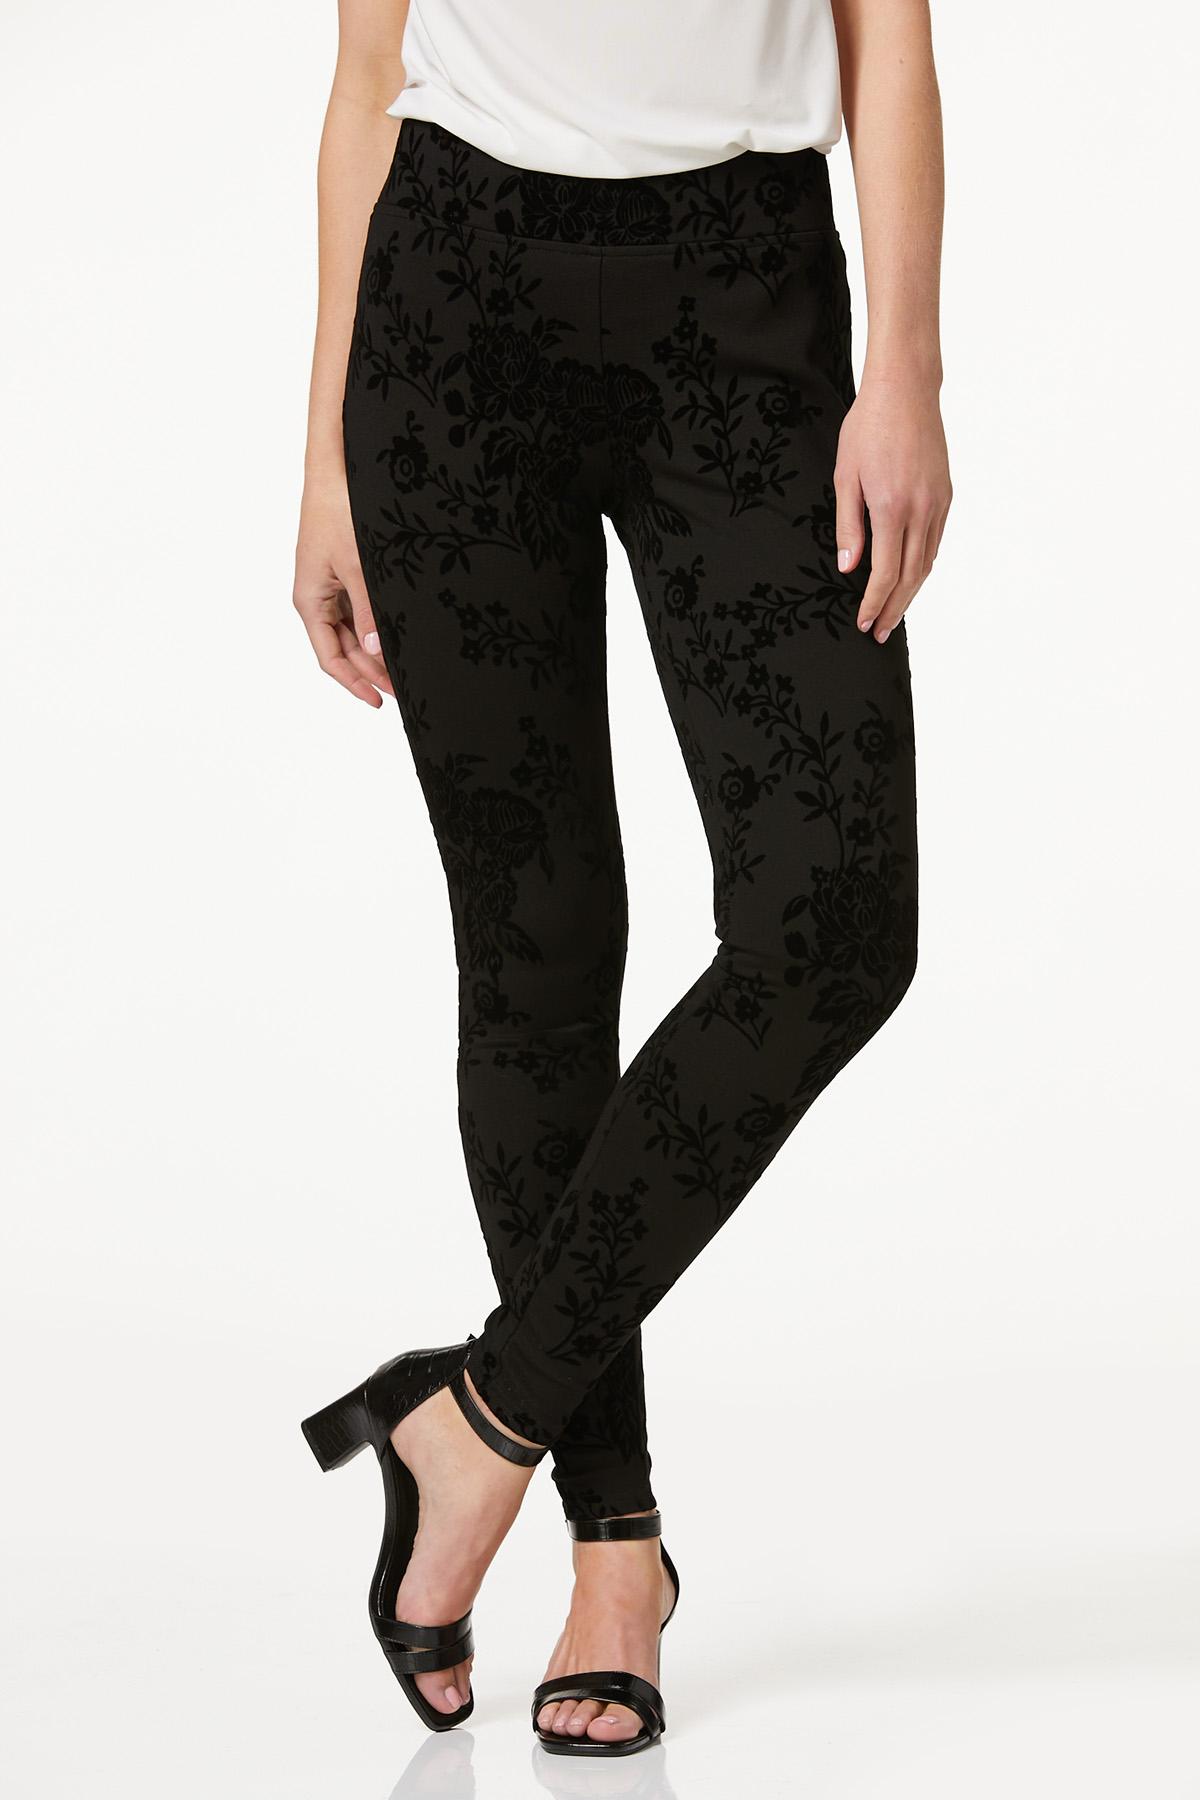 Cato Fashions  Cato Floral Flocked Leggings